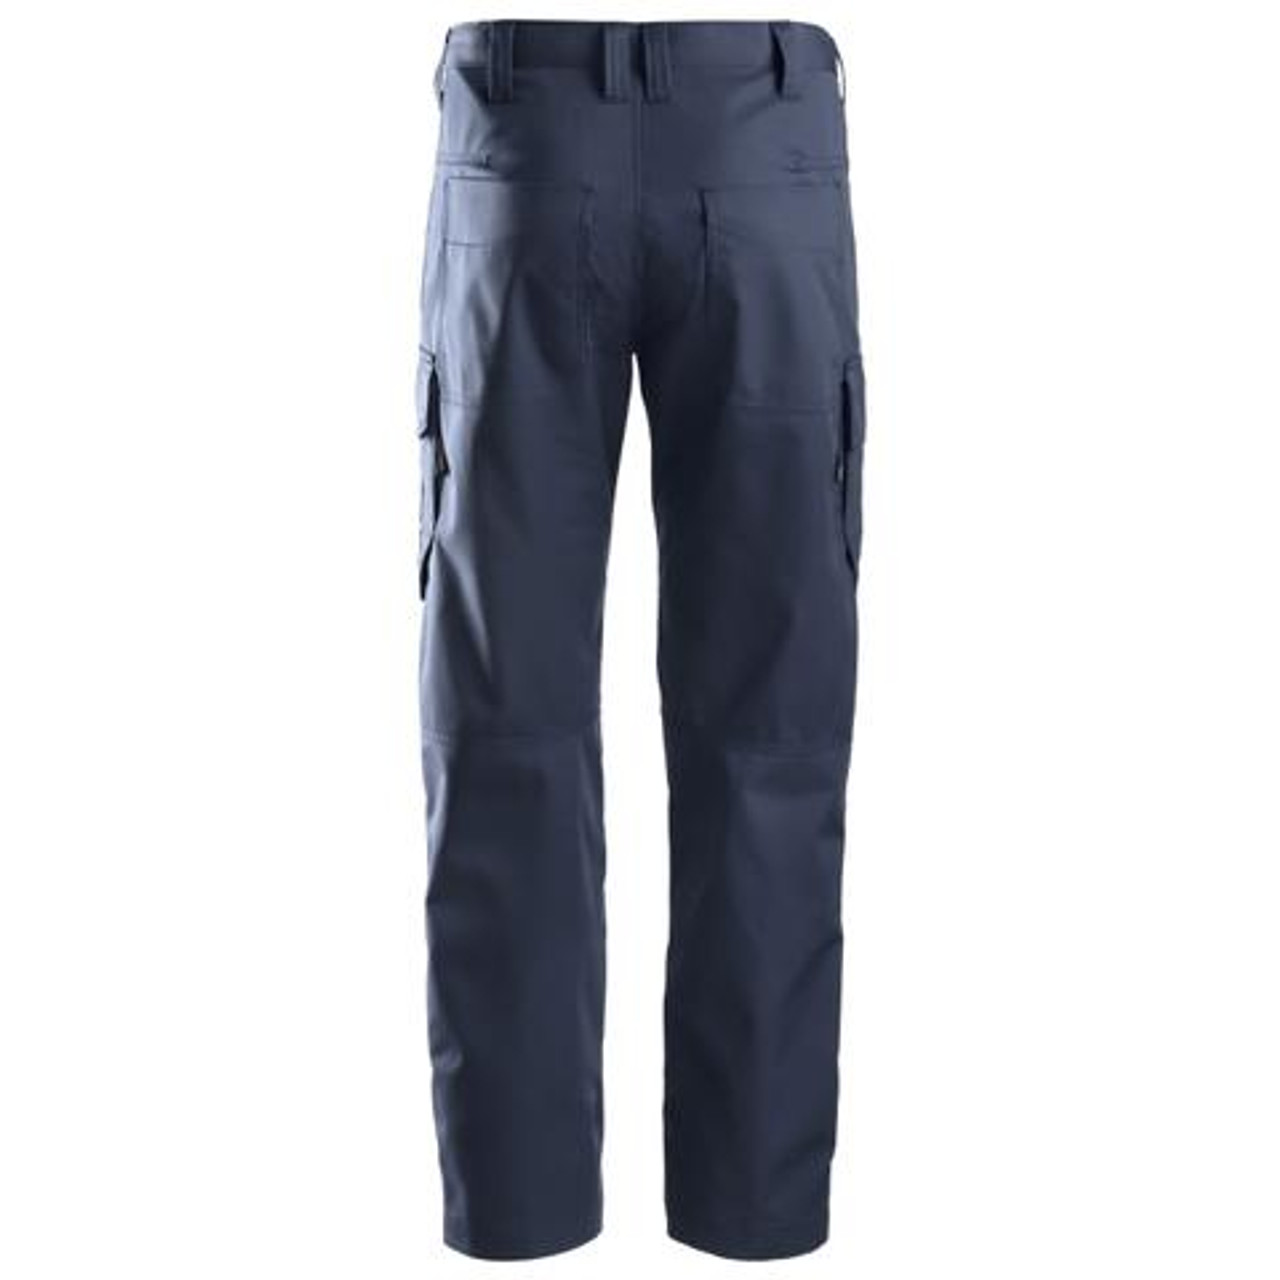 Suitable work Trousers available in Australia, New Zealand and Canada SNICKERS Cordura Navy Blue Trousers for Electricians